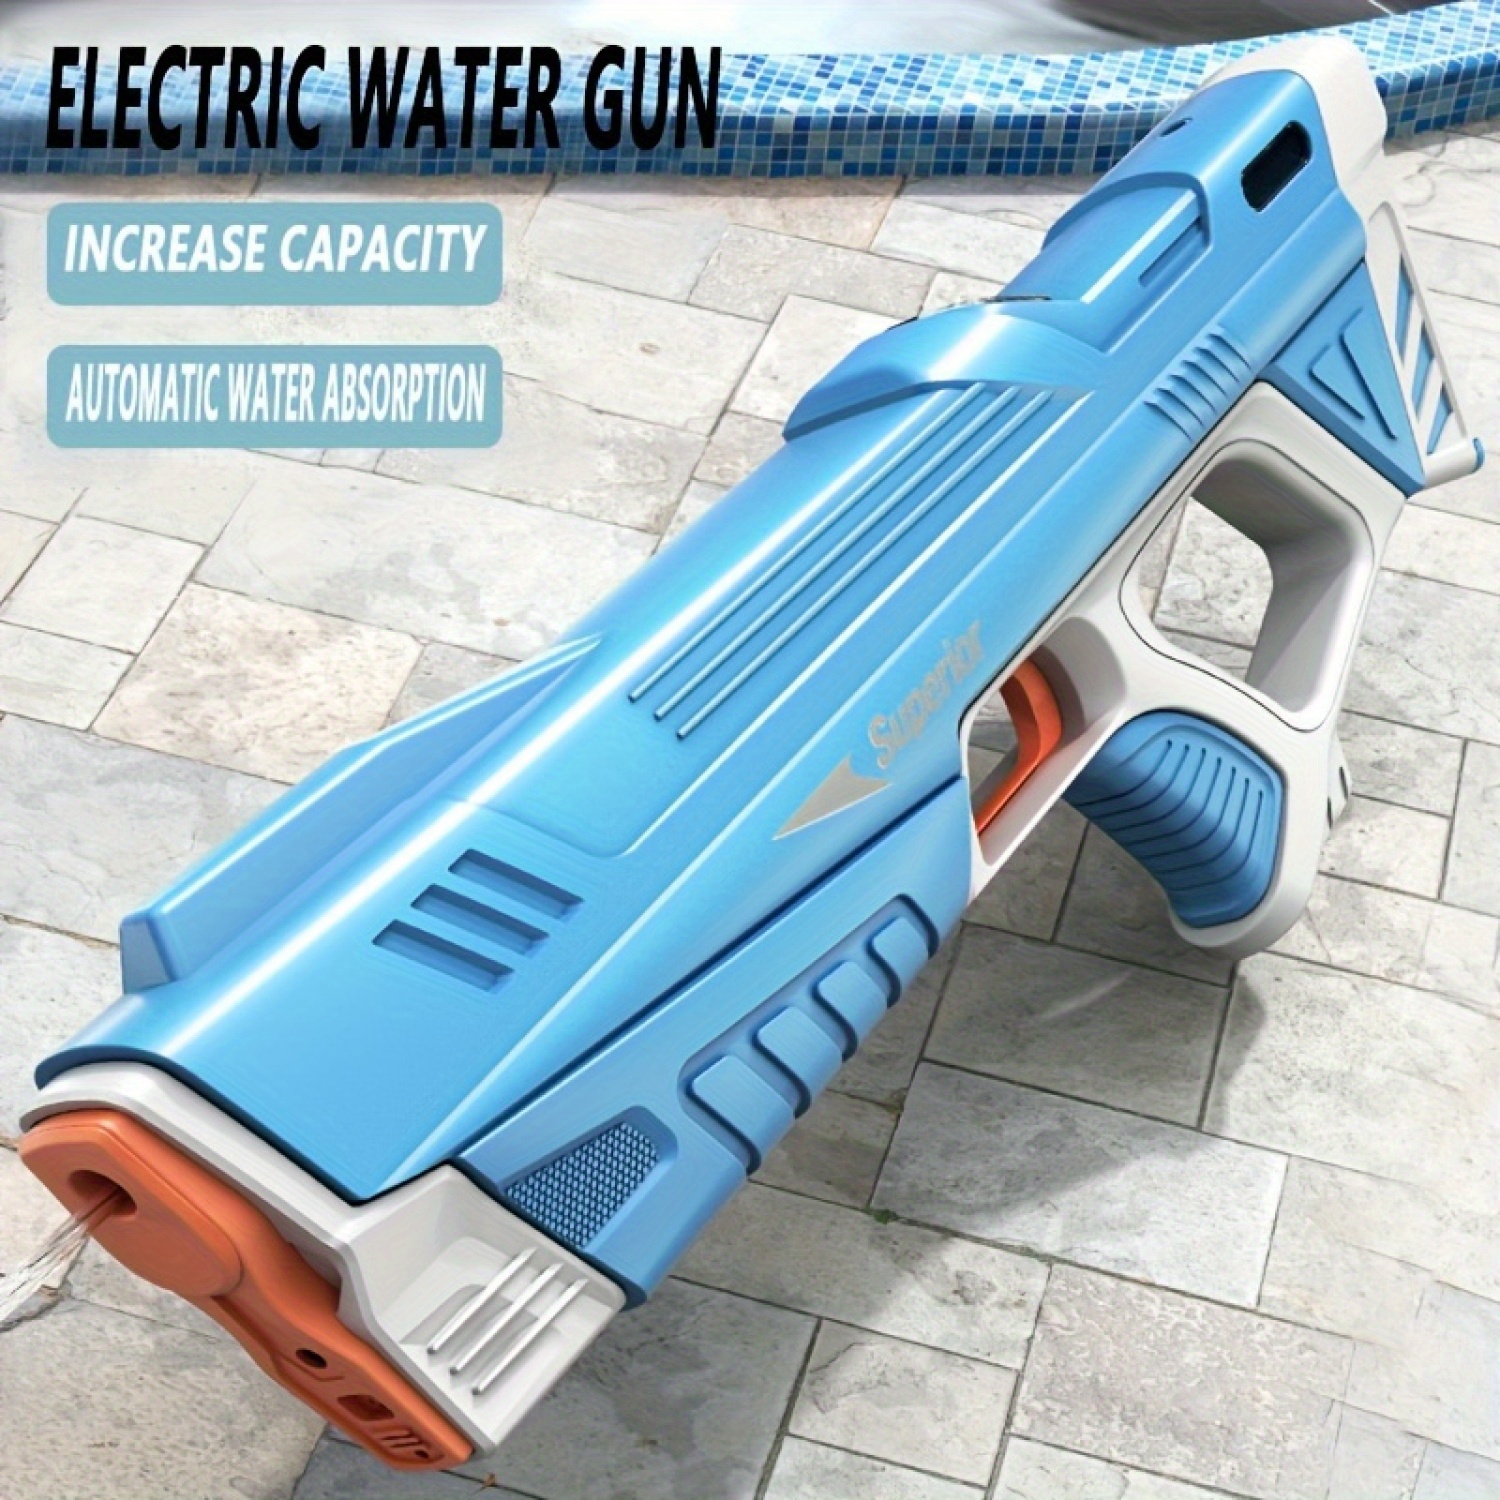 

Automatic Water Gun With Continuous Shooting, Large Capacity For Automatic Water Absorption, Suitable For Summer Children's Parties, Summer Parent-child Interactive Festival Gifts